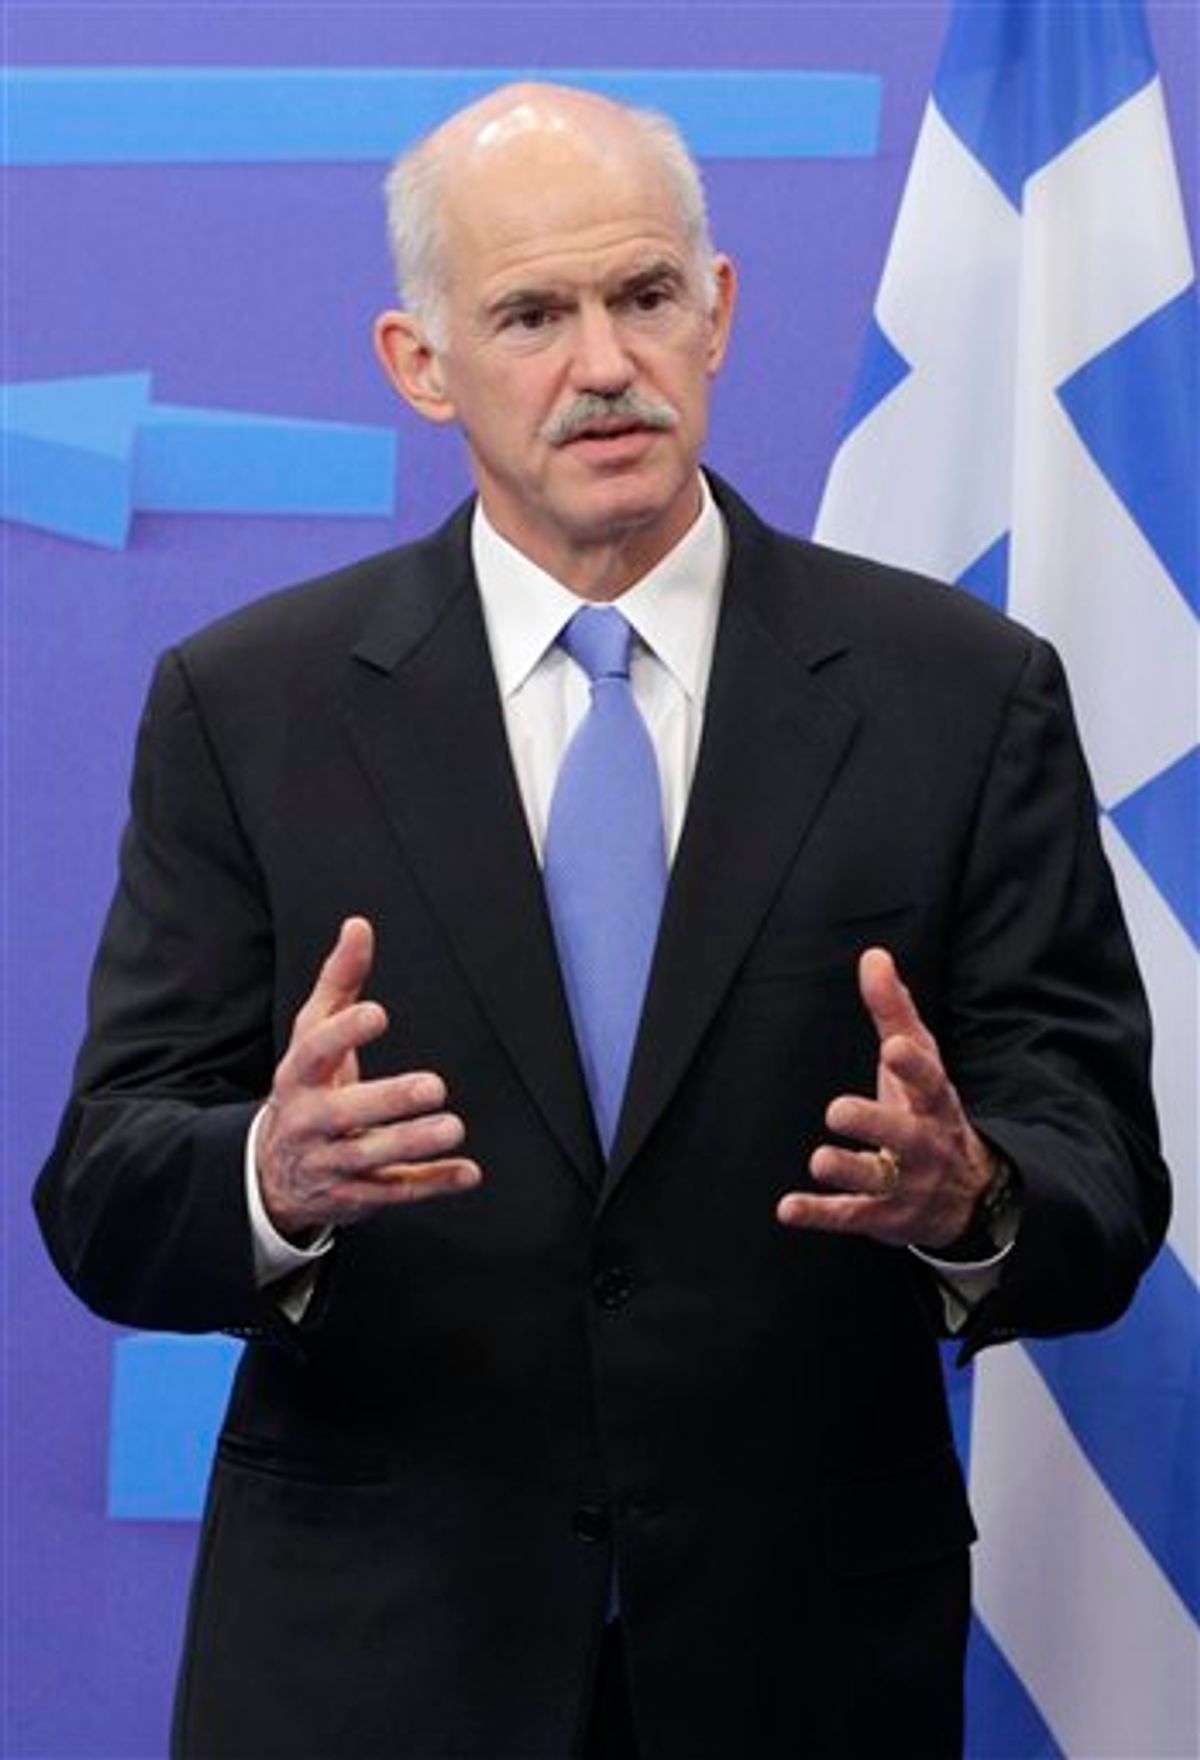 Greek Prime Minister George Papandreou addresses the media at the European Council building in Brussels, Monday, June 20, 2011. Greece's embattled Prime Minister headed to Brussels for meetings with EU President Herman Van Rompuy and European Commission President Jose Manuel Barroso. (AP Photo/Yves Logghe) (AP)